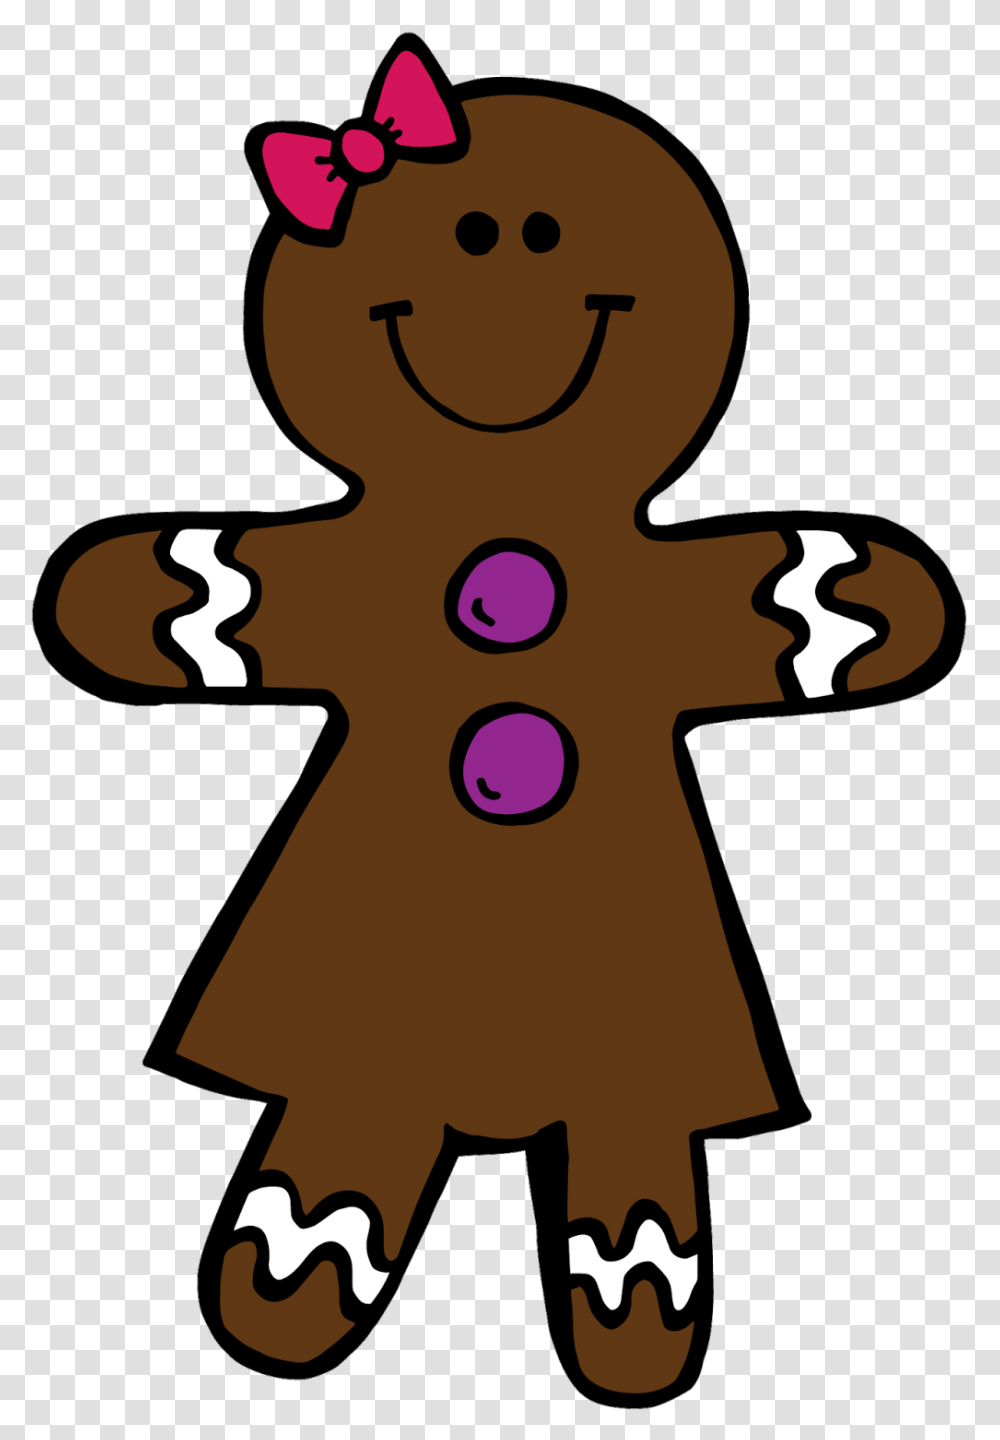 Collection Of Gingerbread Girl Clipart High Quality Gingerbread Clipart Black And White, Cookie, Food, Biscuit Transparent Png